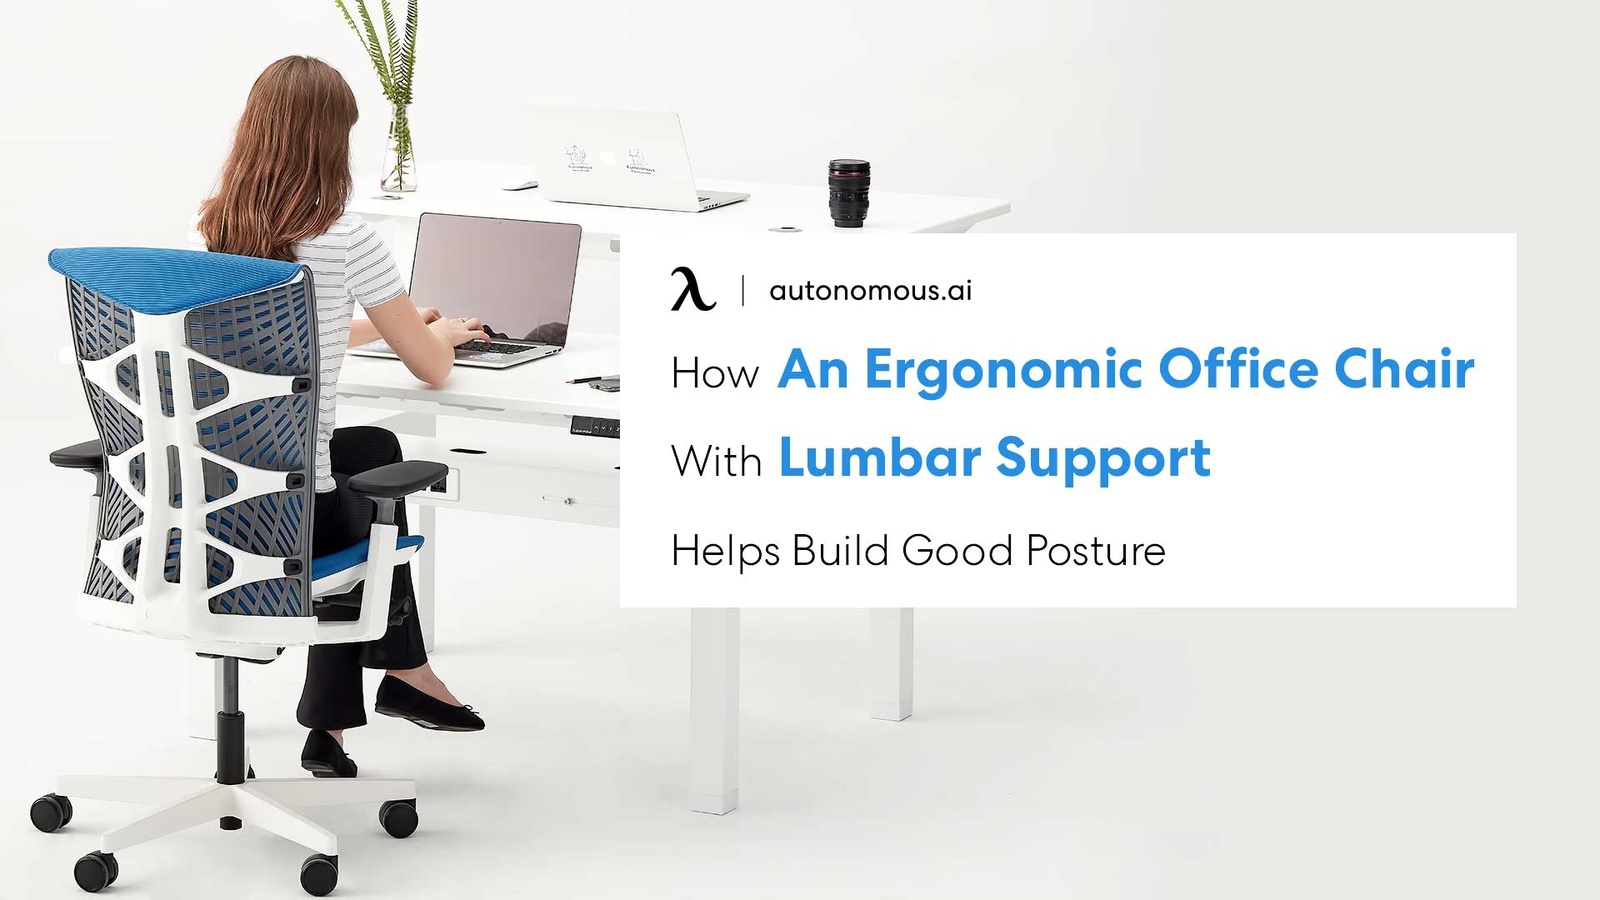 How An Ergonomic Office Chair With Lumbar Support Helps Build Good Posture